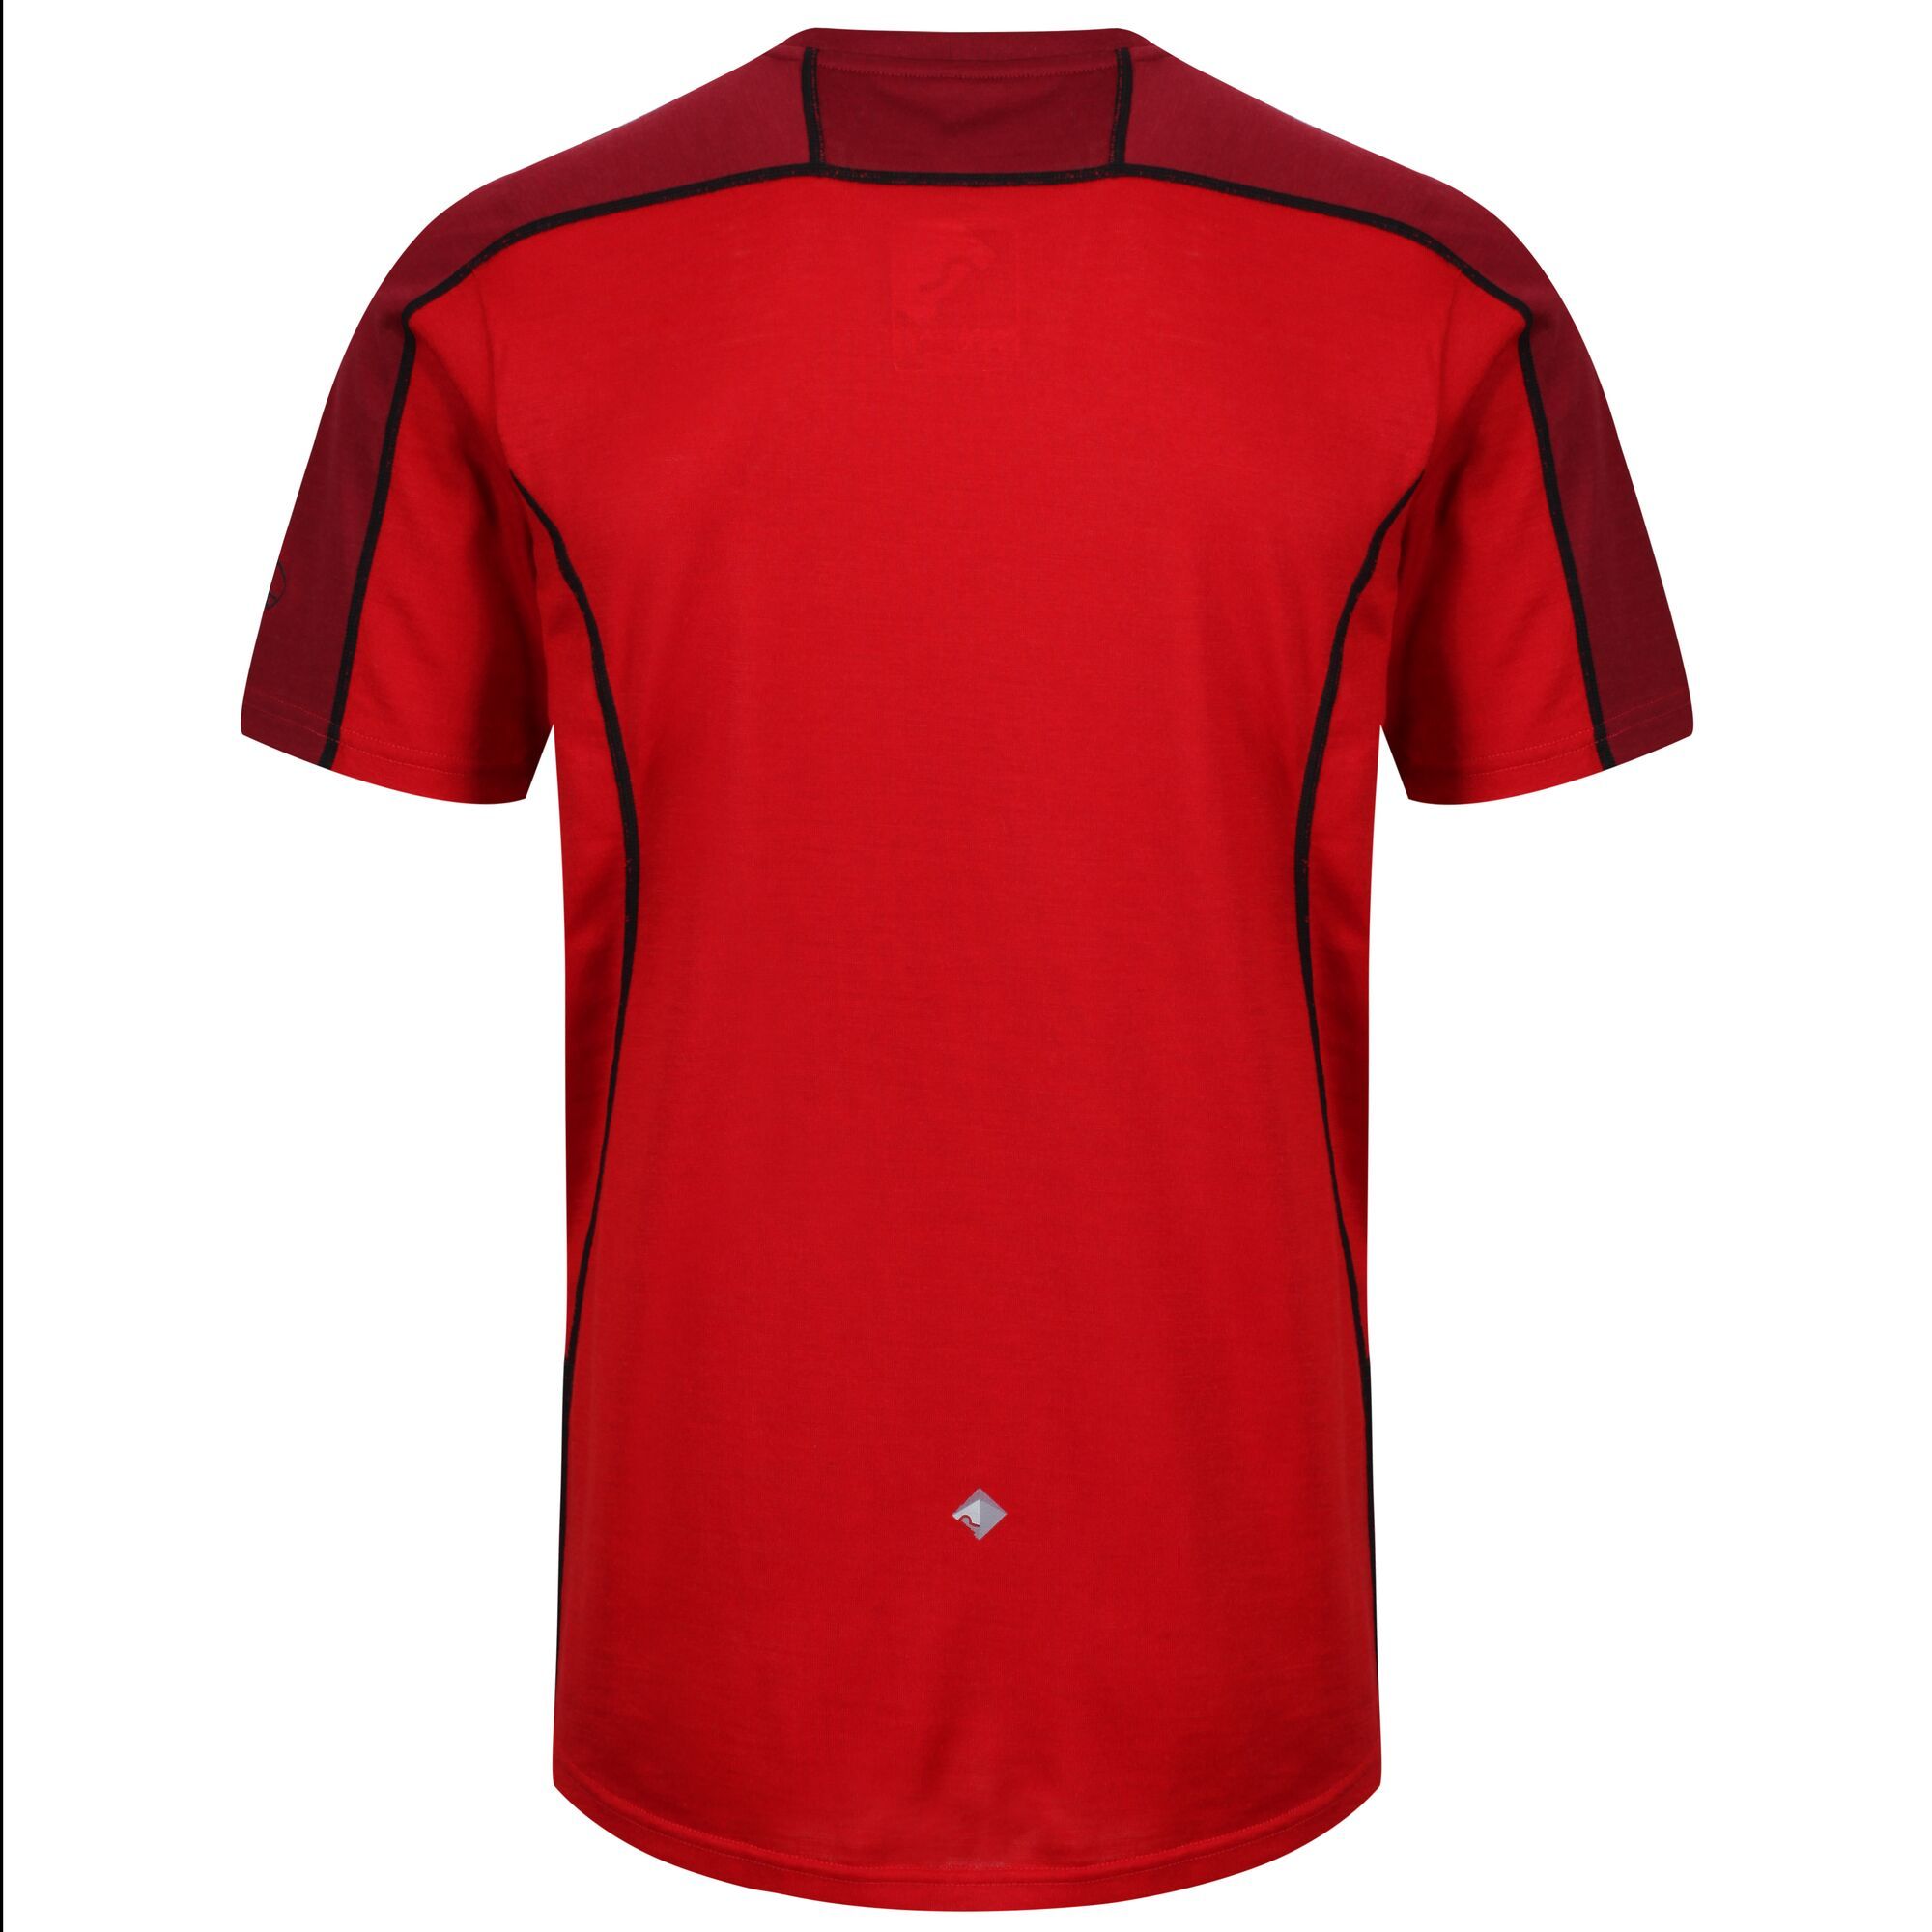 50% merino, 50% polyester. Super soft handle. Natural odour control. Good wicking performance.